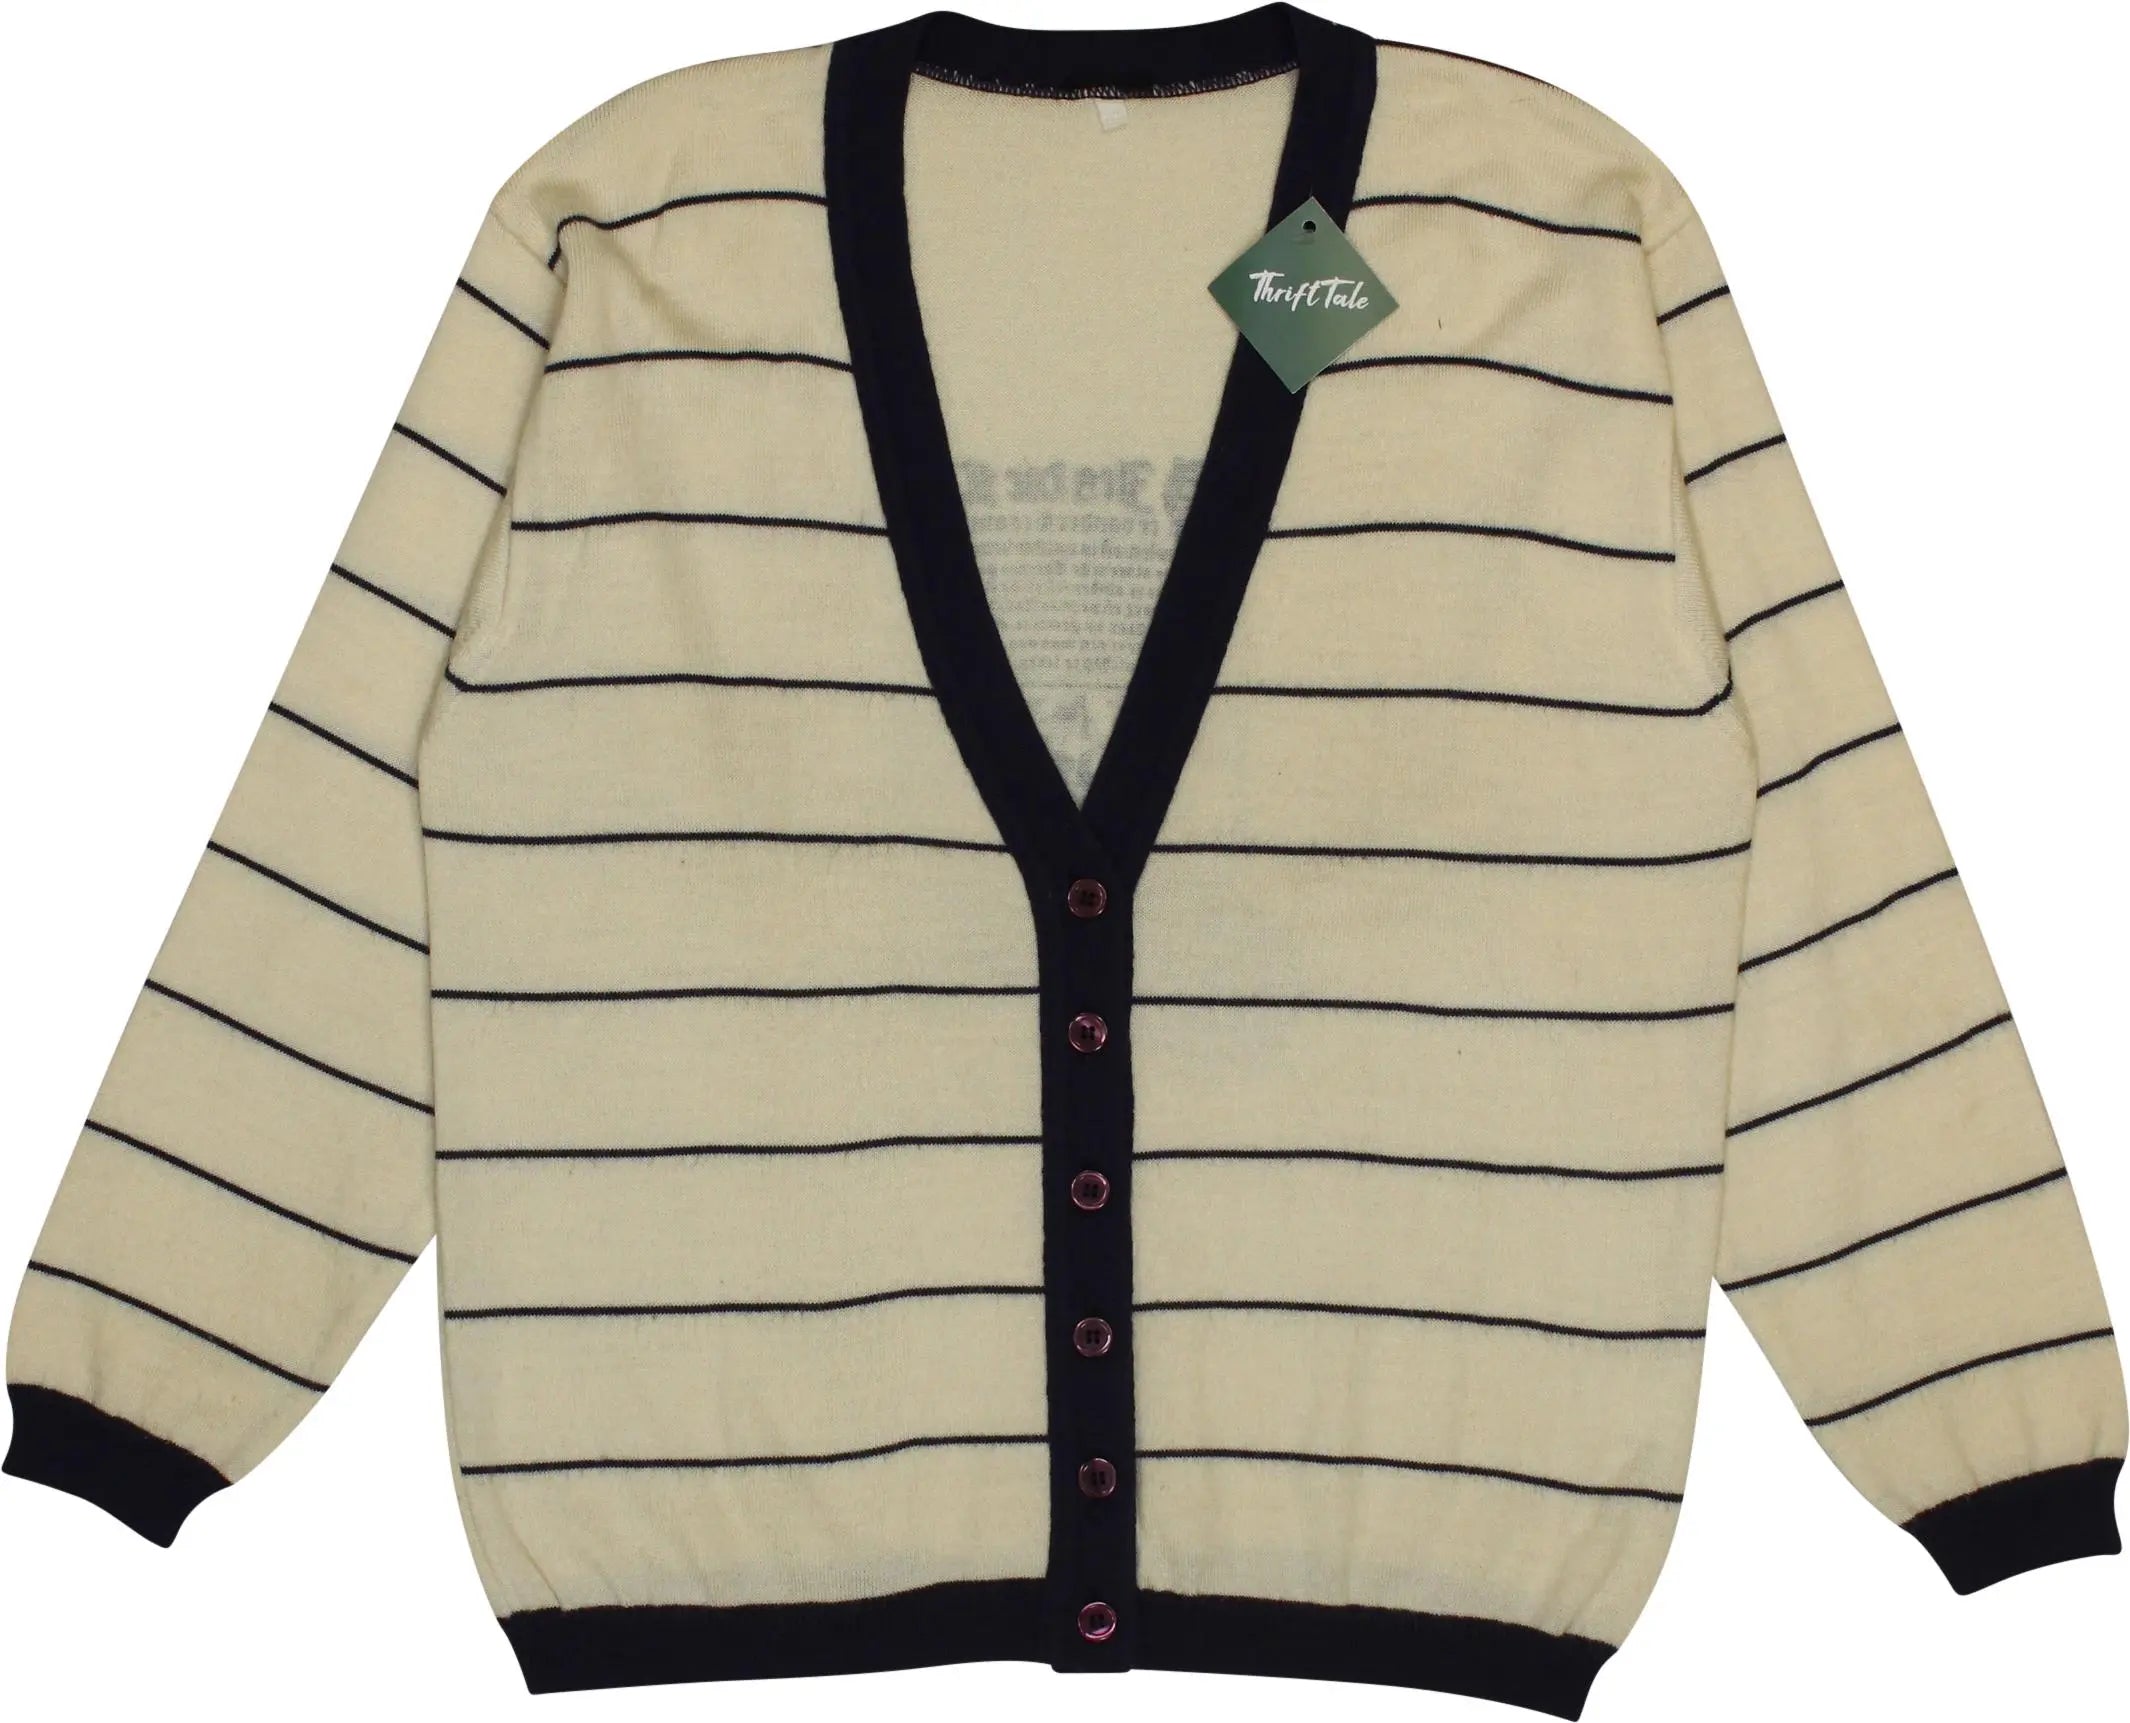 Unknown - Cream Striped Cardigan- ThriftTale.com - Vintage and second handclothing